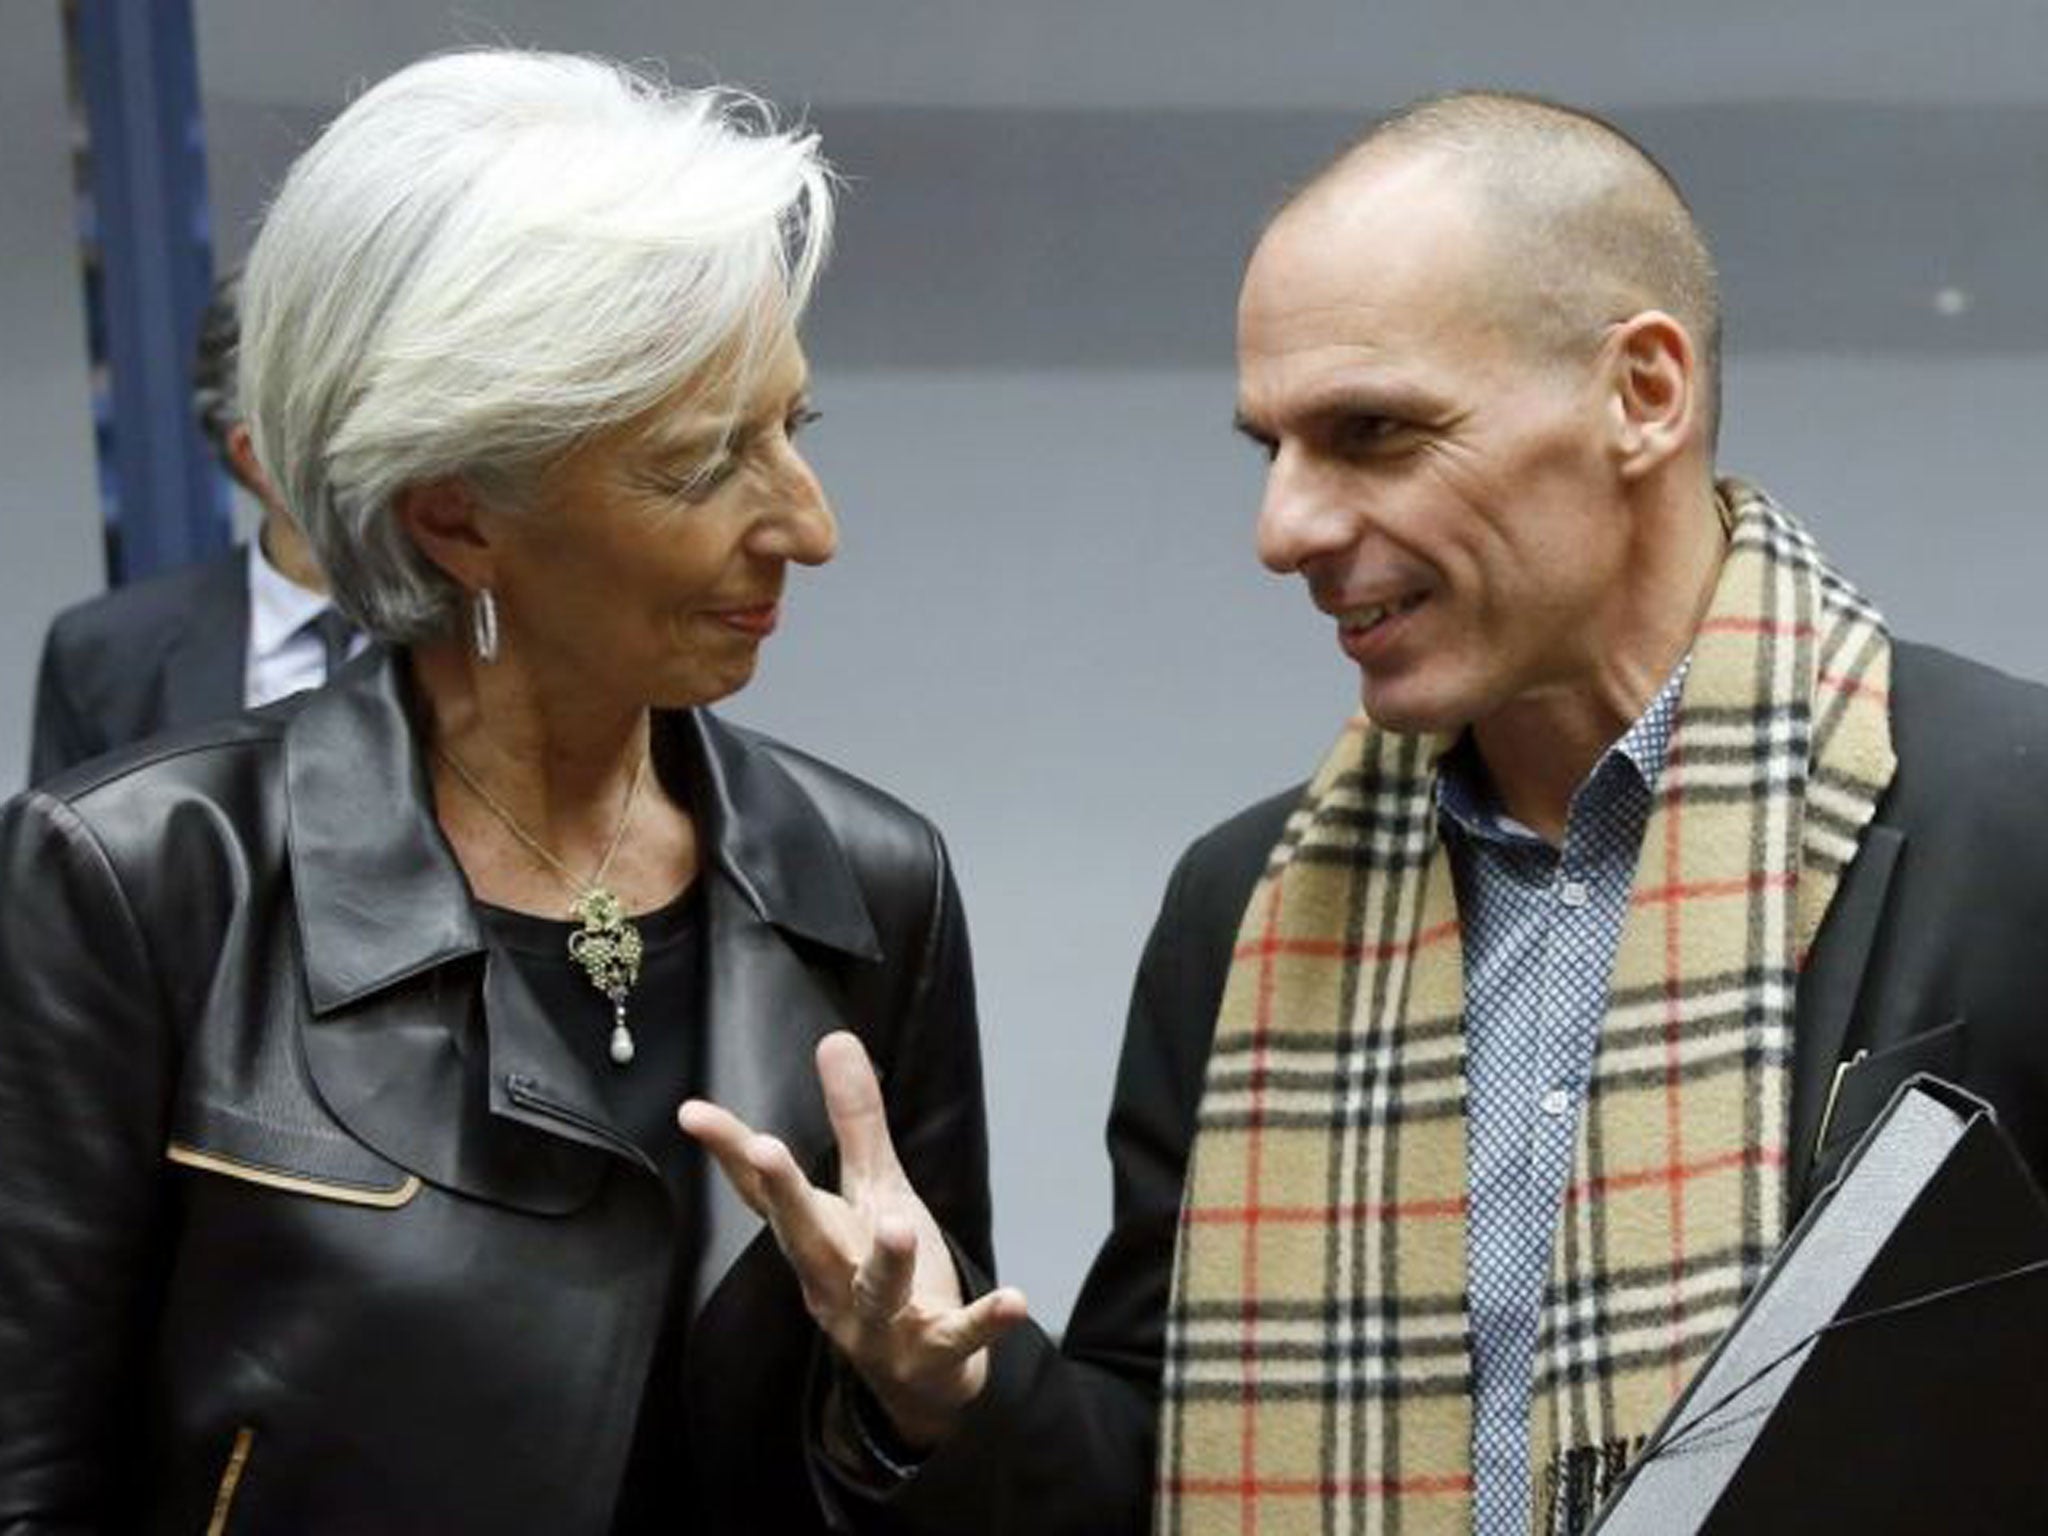 International Monetary Fund (IMF) managing mirector Christine Lagarde listens to Greek Finance Minister Yanis Varoufakis during a eurozone finance ministers meeting to discuss Athens' plans to reverse austerity measures agreed as part of its bailout